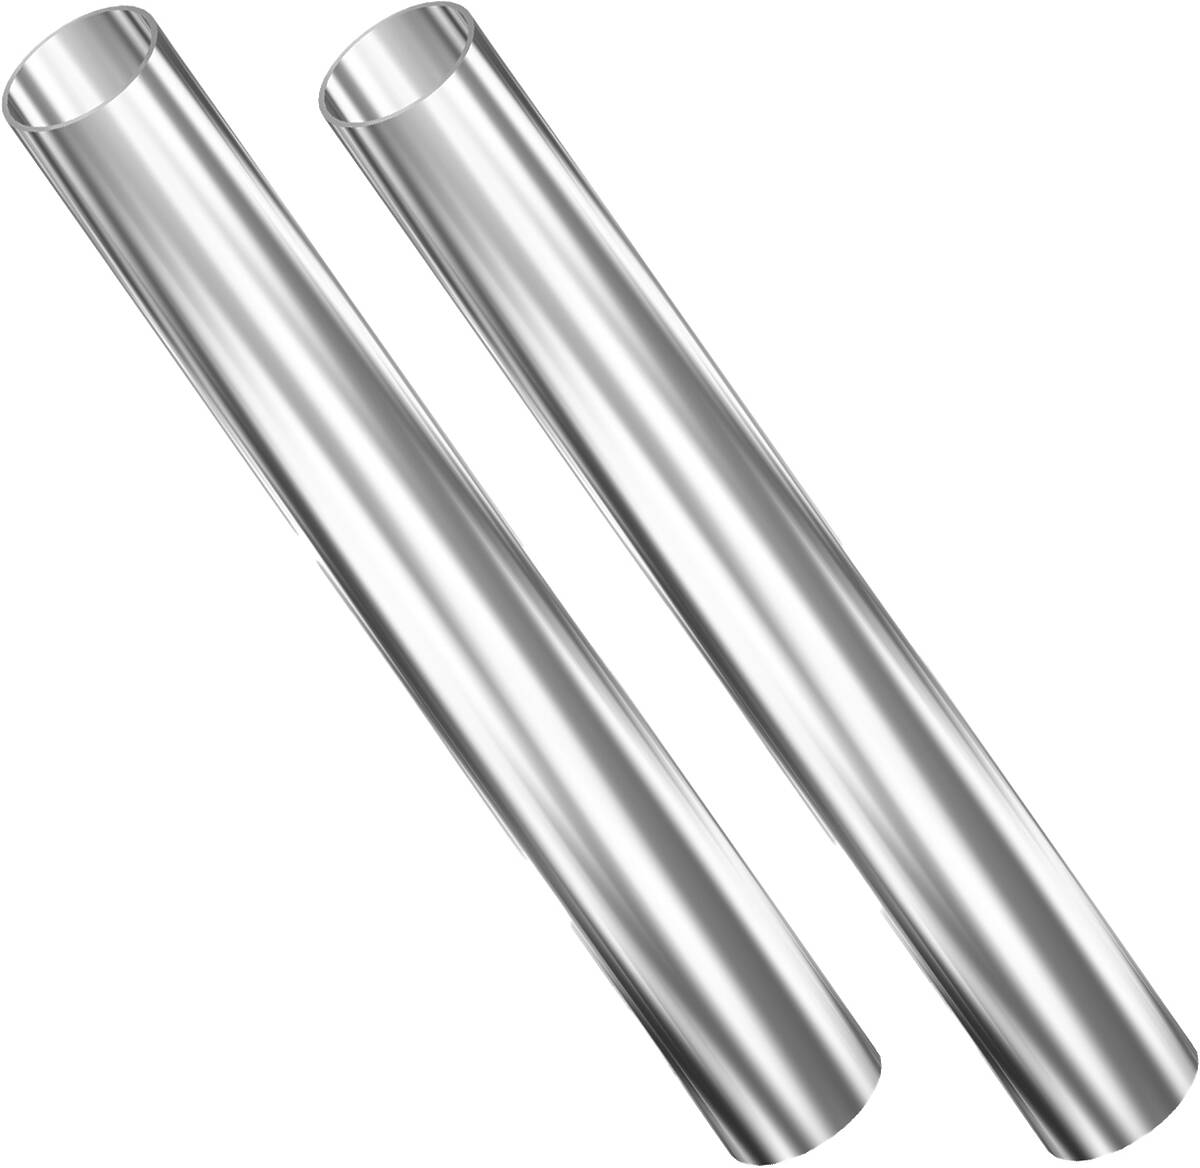 Unicol 1500X2 2 x 150cm mild steel chrome finished column product image. Click to enlarge.